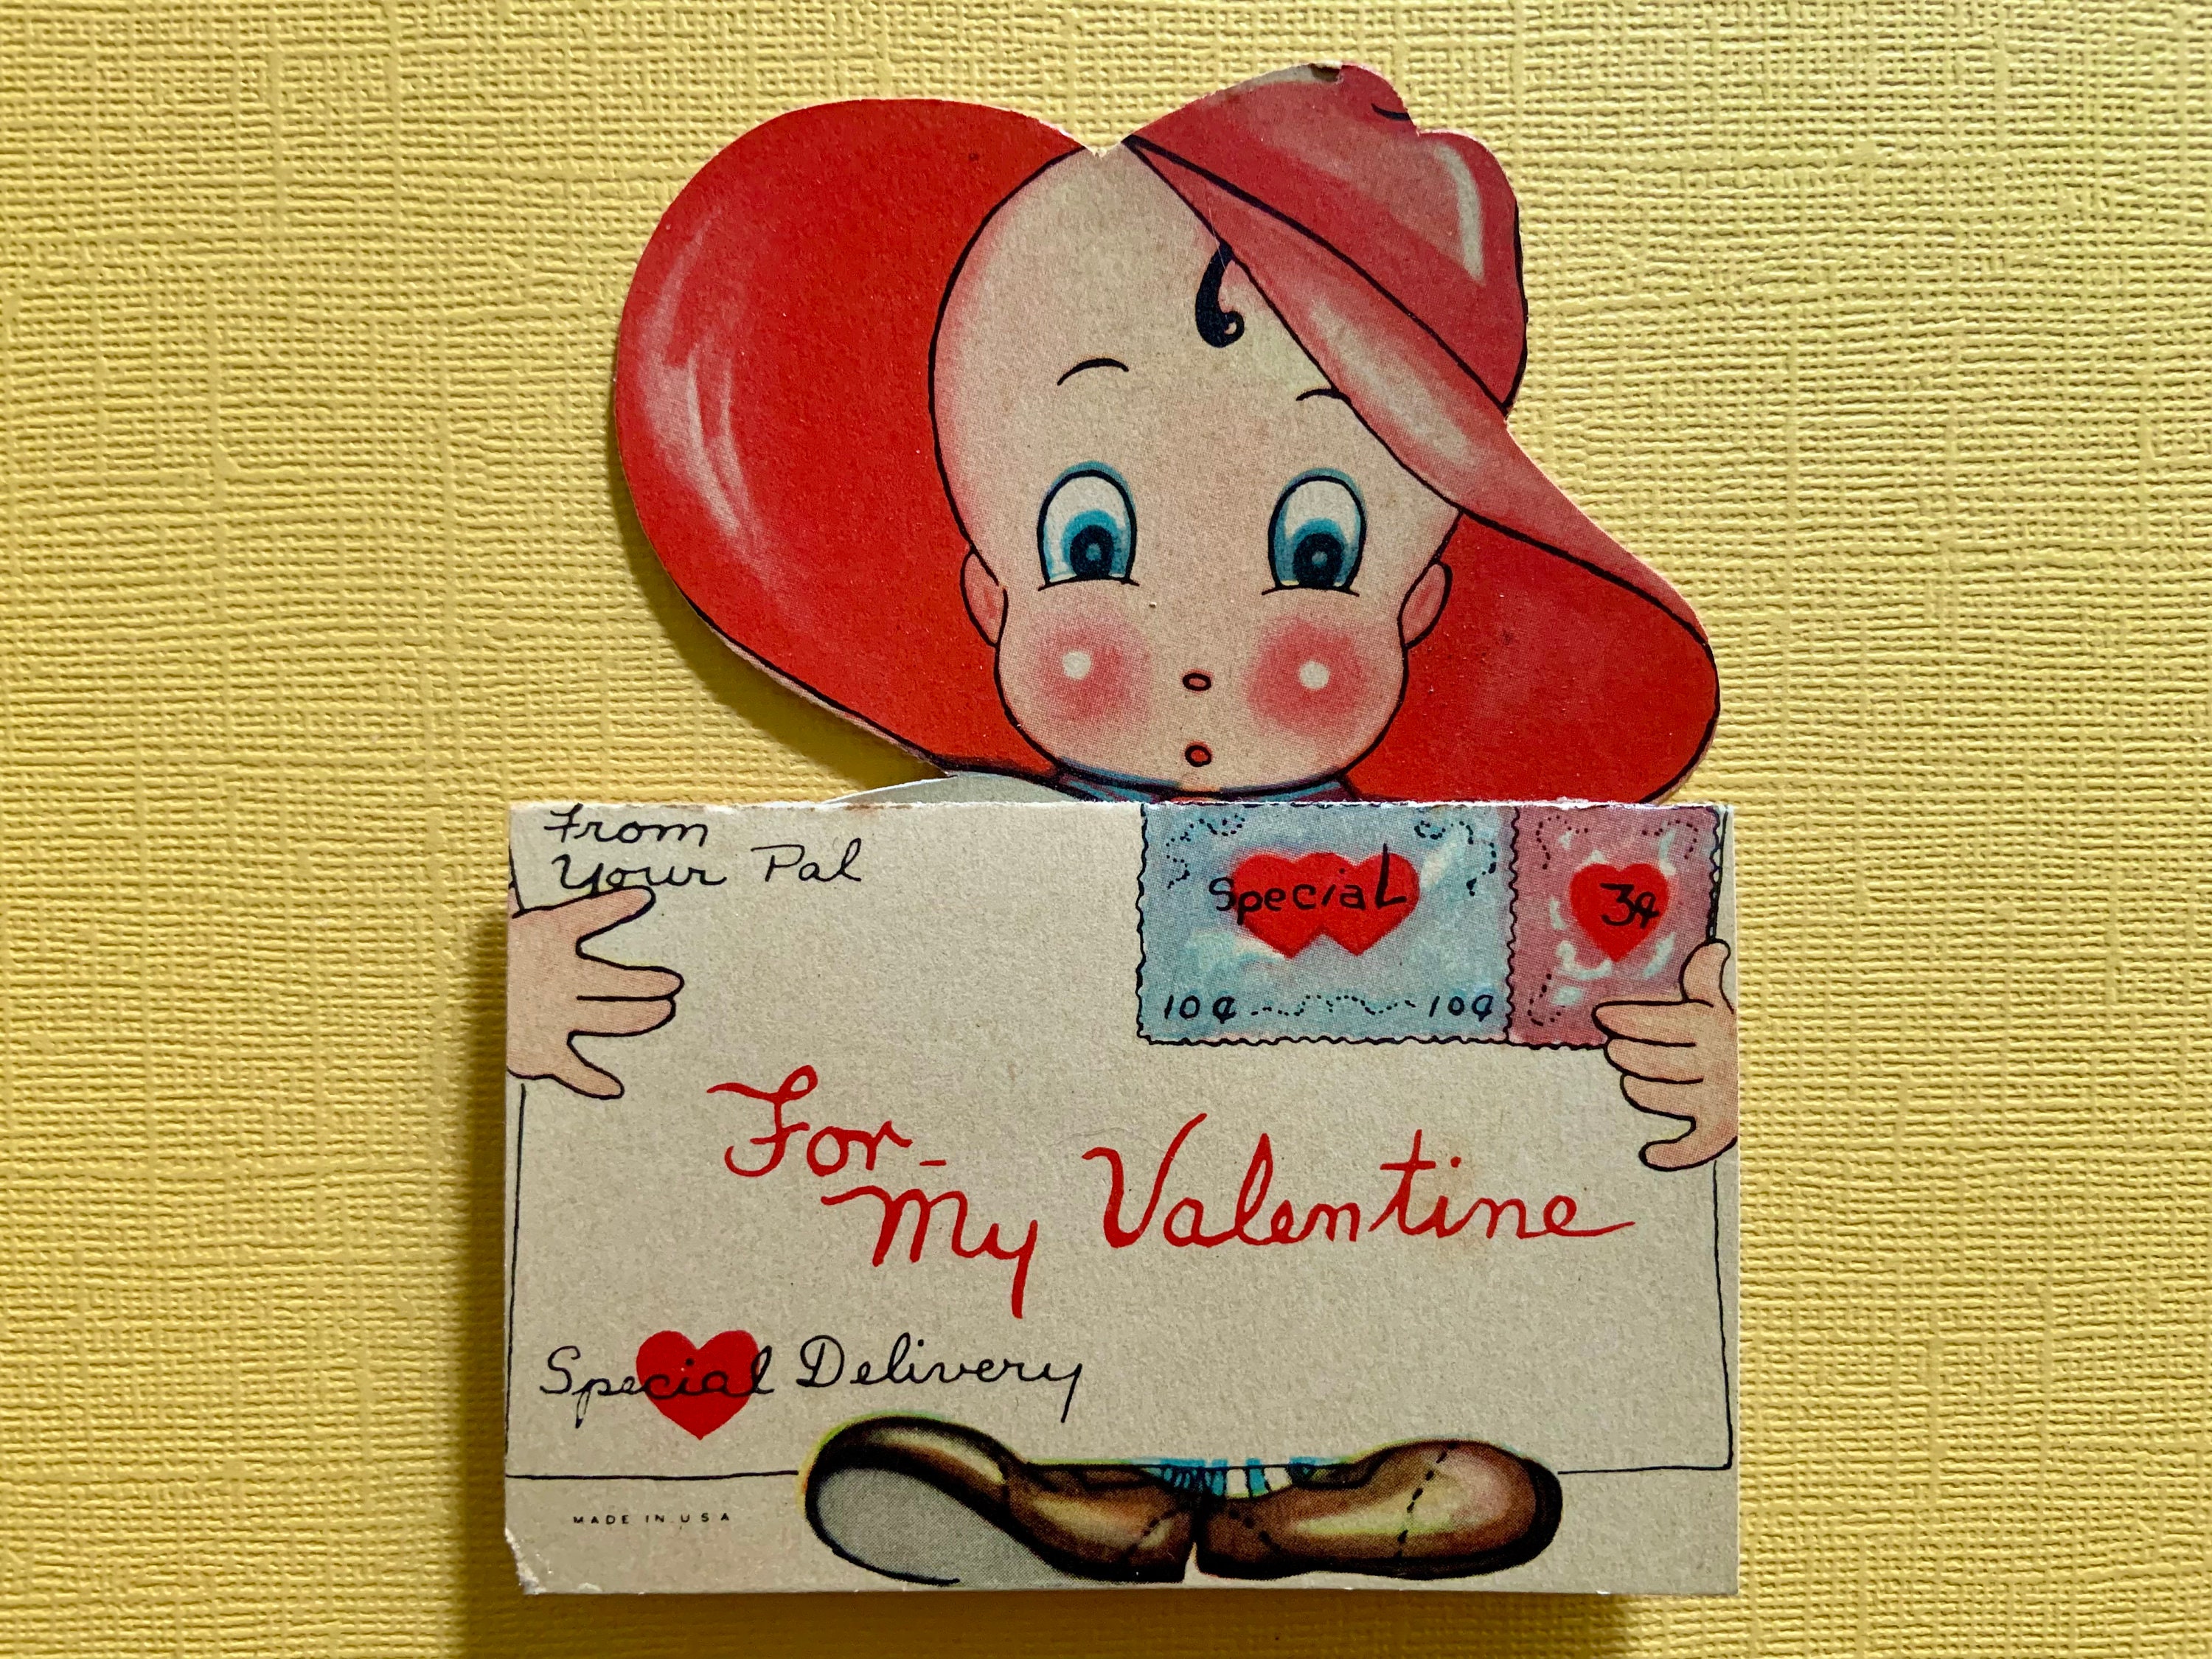 Vintage Valentines Day Card With Cut Out Heart Shaped Window 